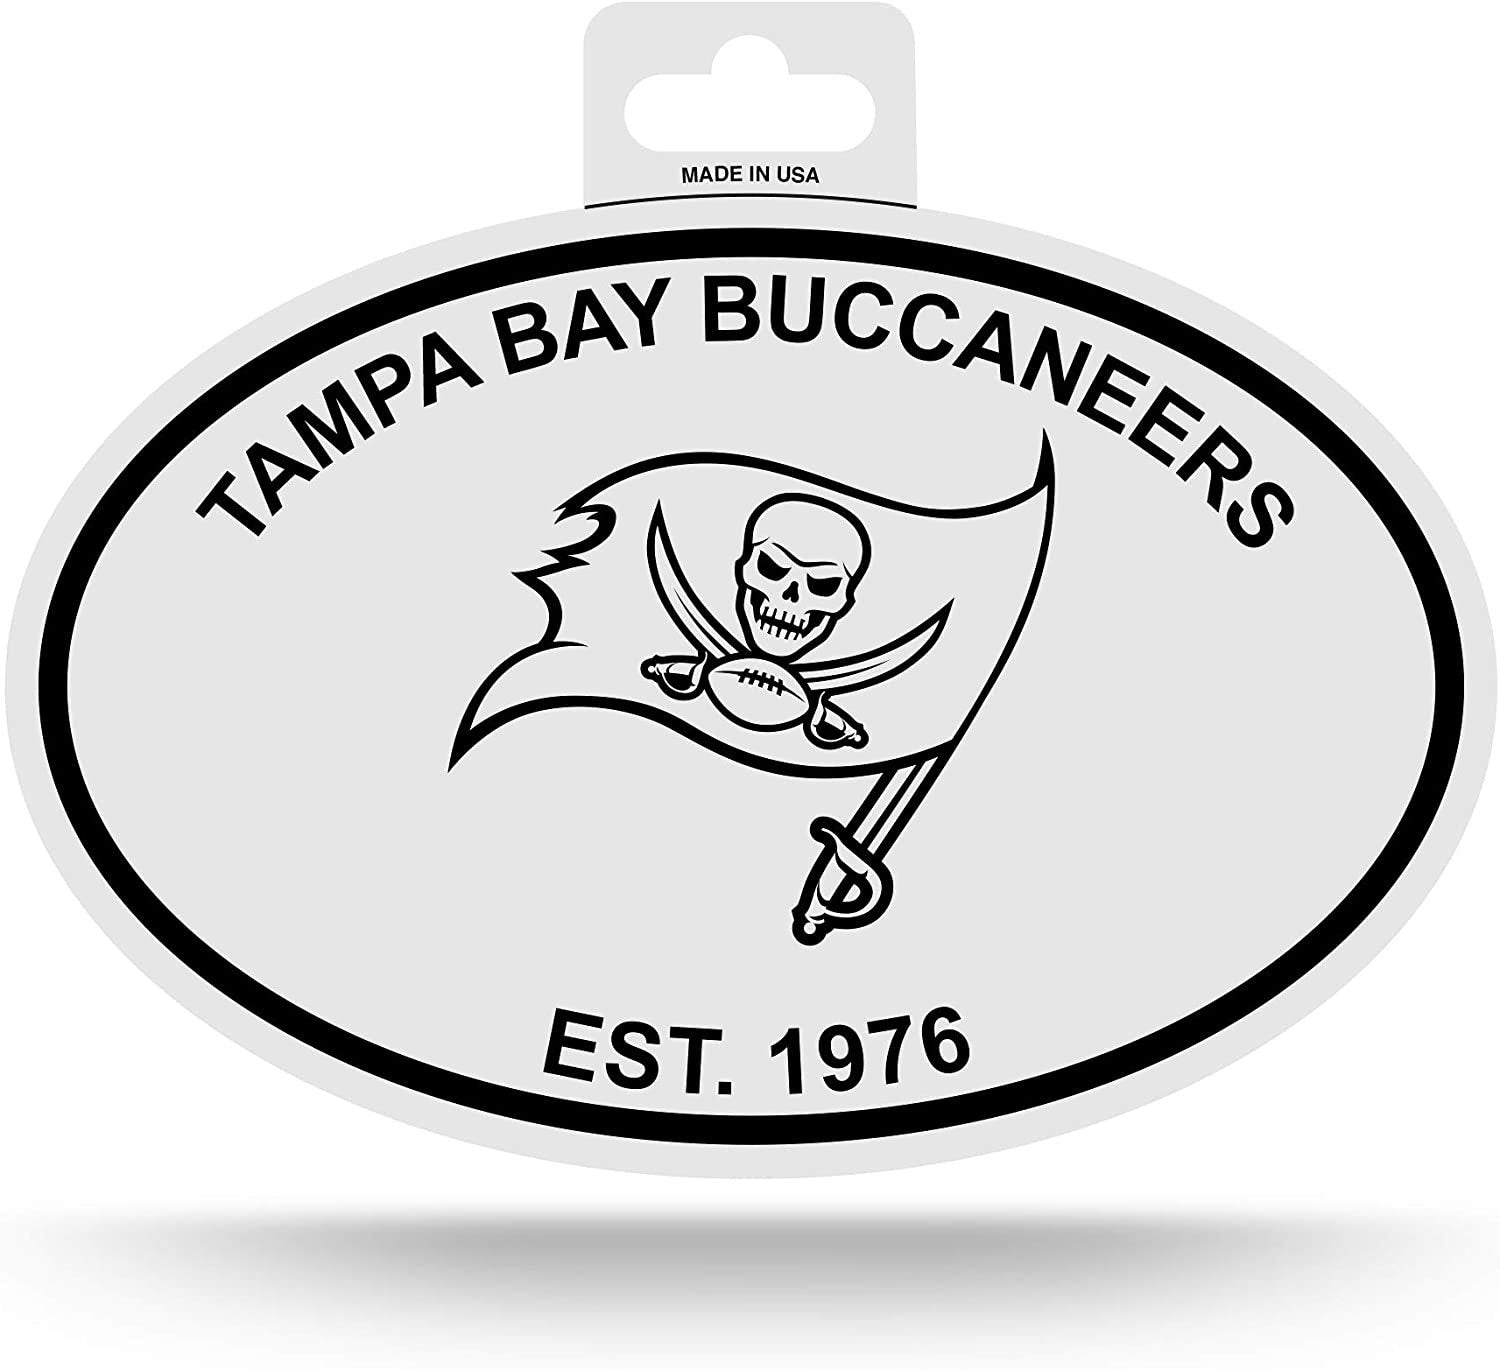 Tampa Bay Buccaneers Black and White Team Logo Oval Sticker Decal, 3.75x5.75 Inch, Full Adhesive Backing